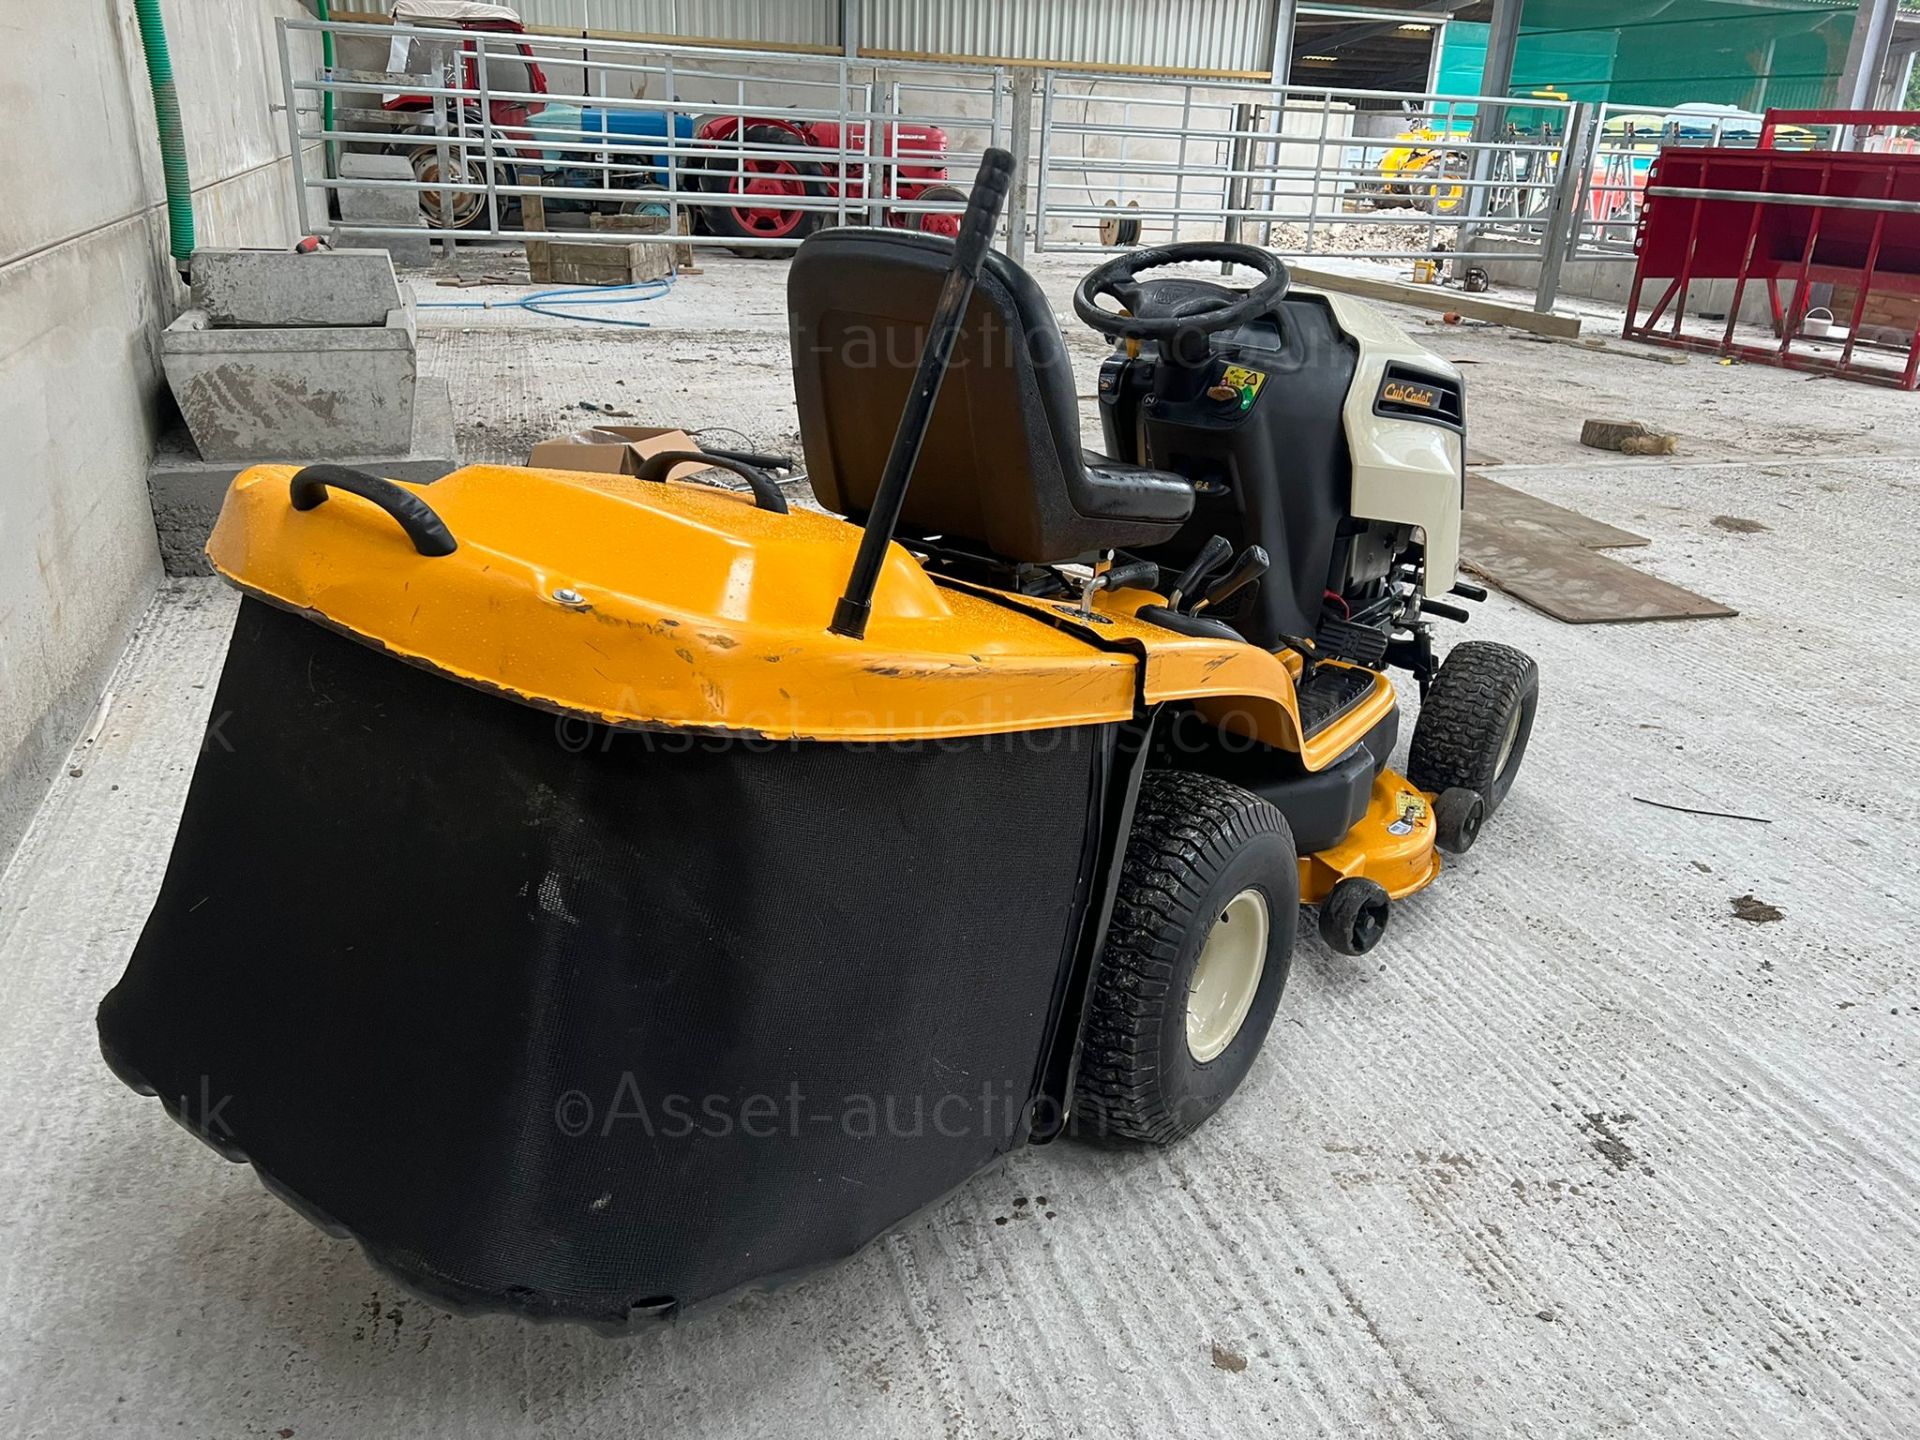 2015 CUB CADET 1020 RIDE ON LAWN MOWER, RUNS WORKS AND CUTS WELL, ONLY 250 HOURS FROM NEW *NO VAT* - Image 4 of 6